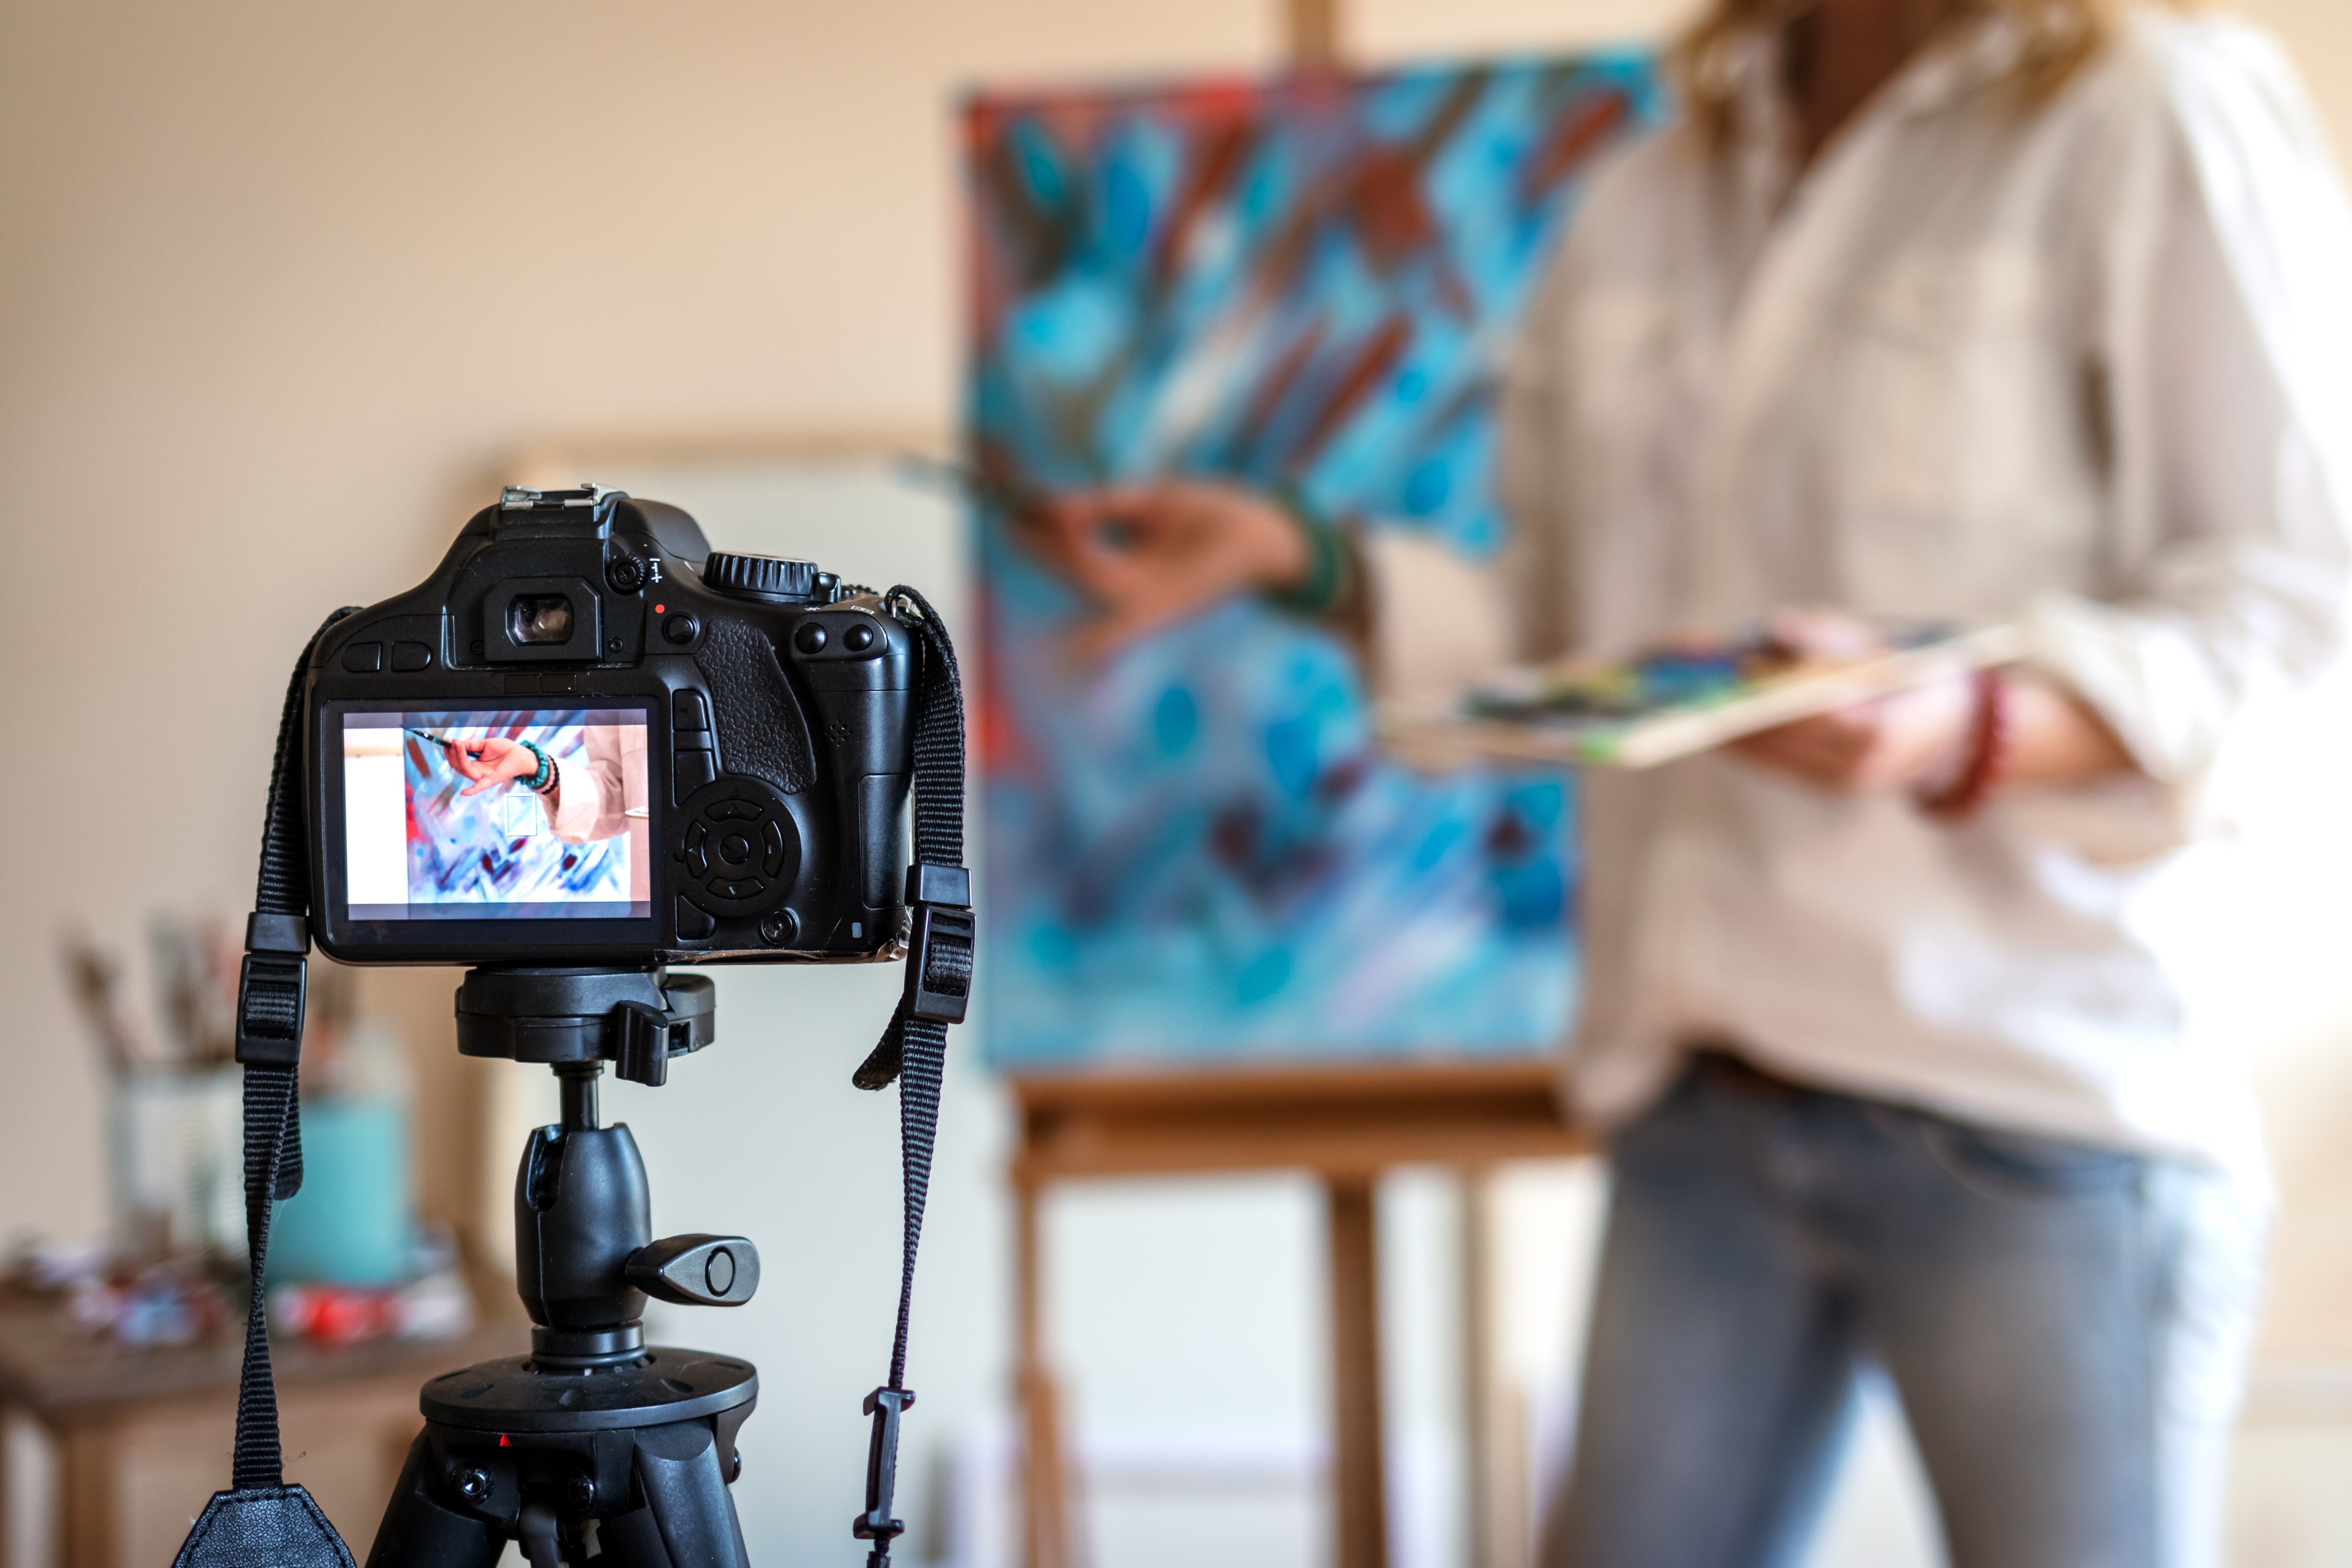 How to promote your art in the Digital Era: How to be seen or sell online